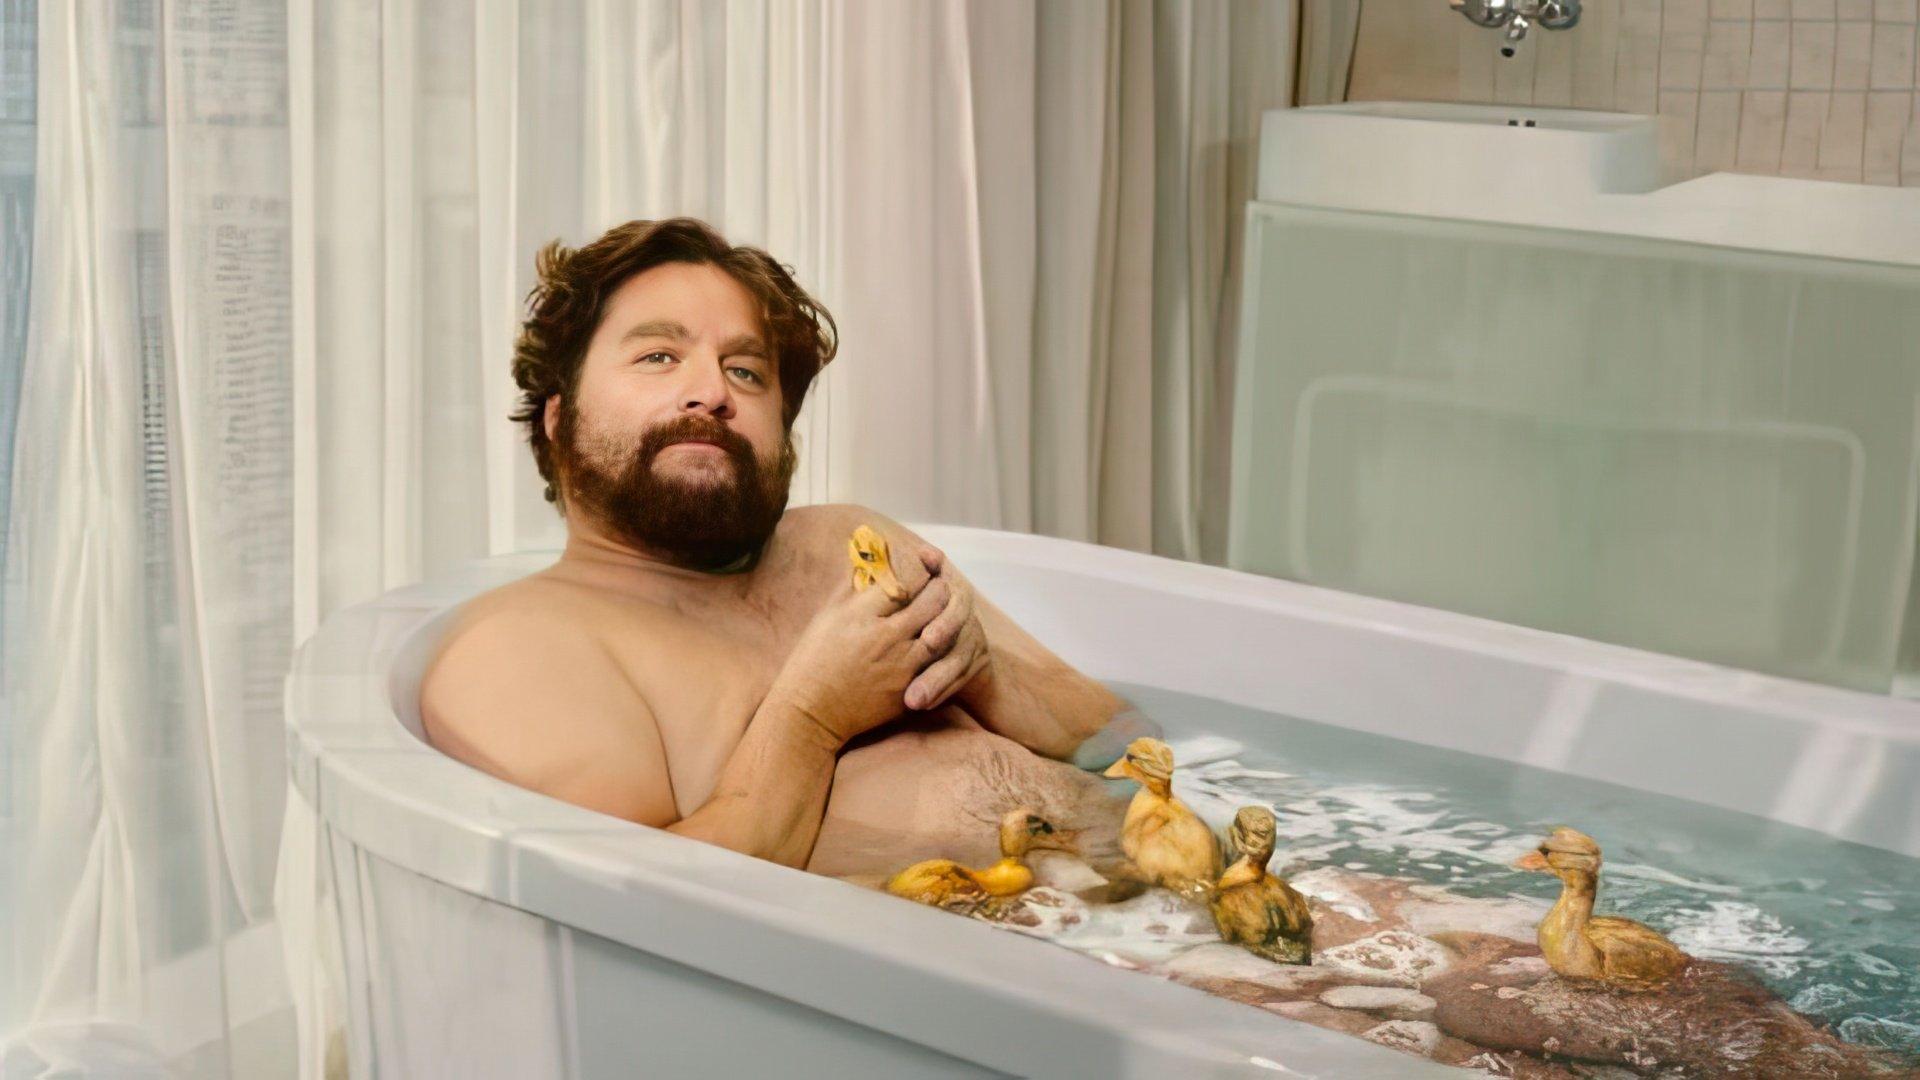 Zach Galifianakis is Very Different from the One We See on Big Screens